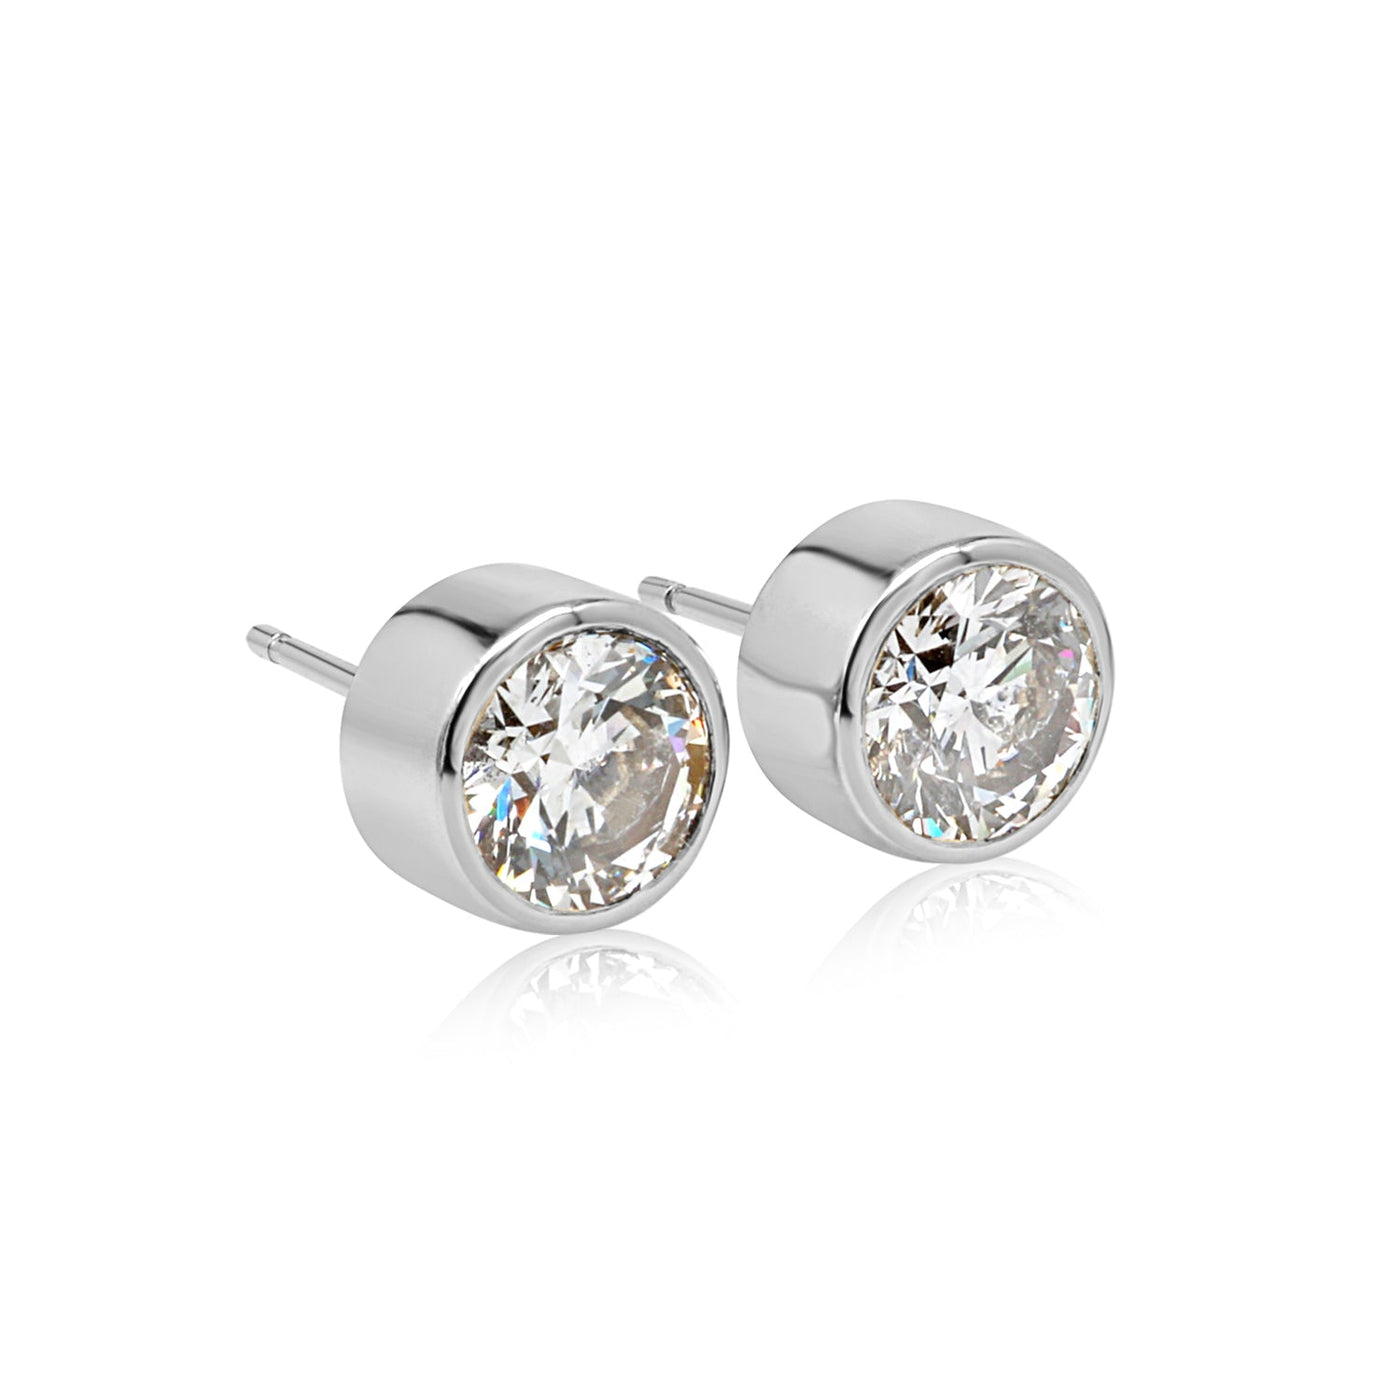 Stud Muffin Earrings White Gold 1.5 Carat